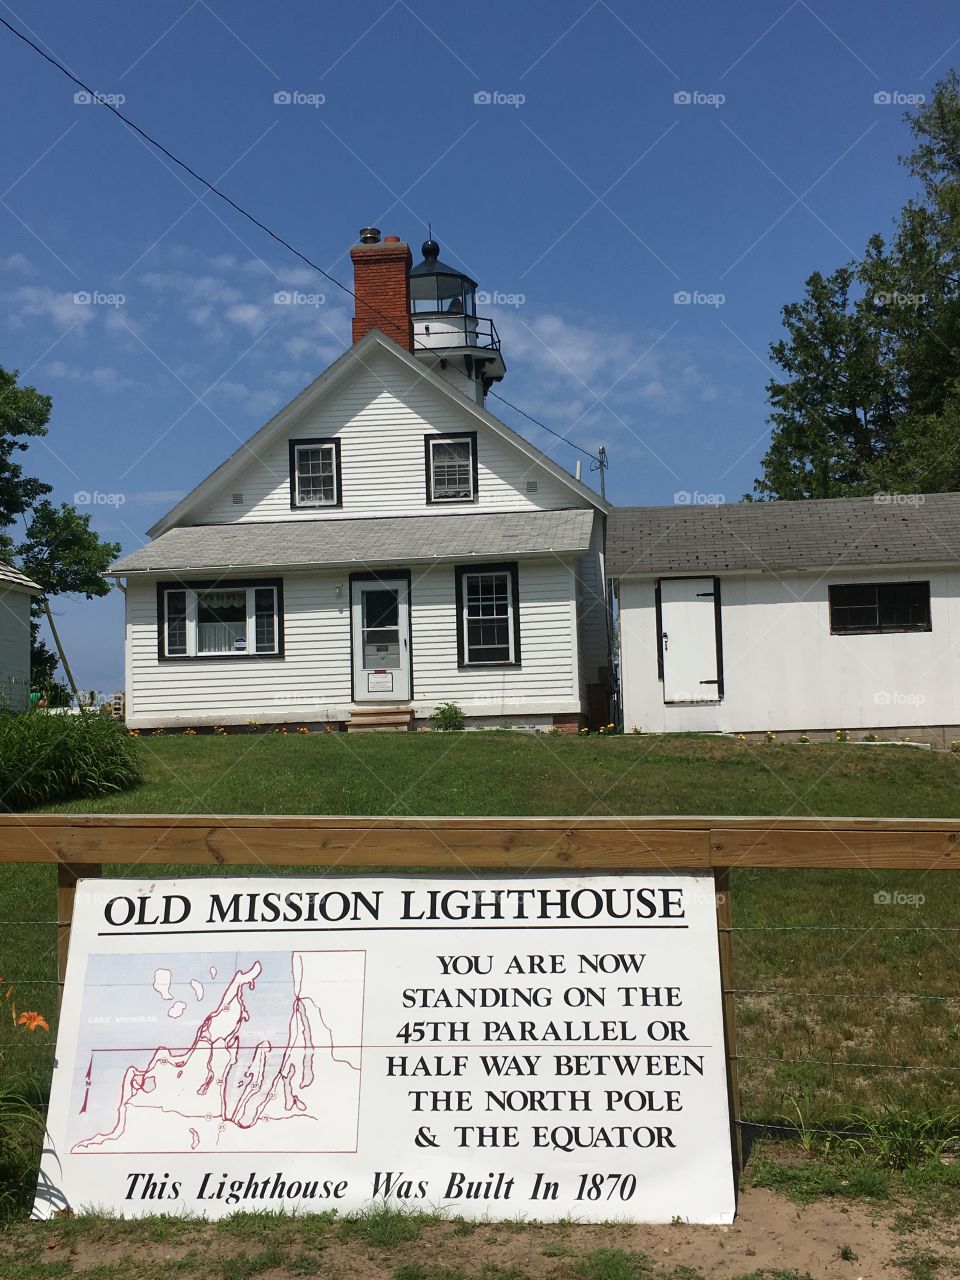 A lighthouse protects the southern latitudes from the dark of the north on Michigan’s 45th Parallel